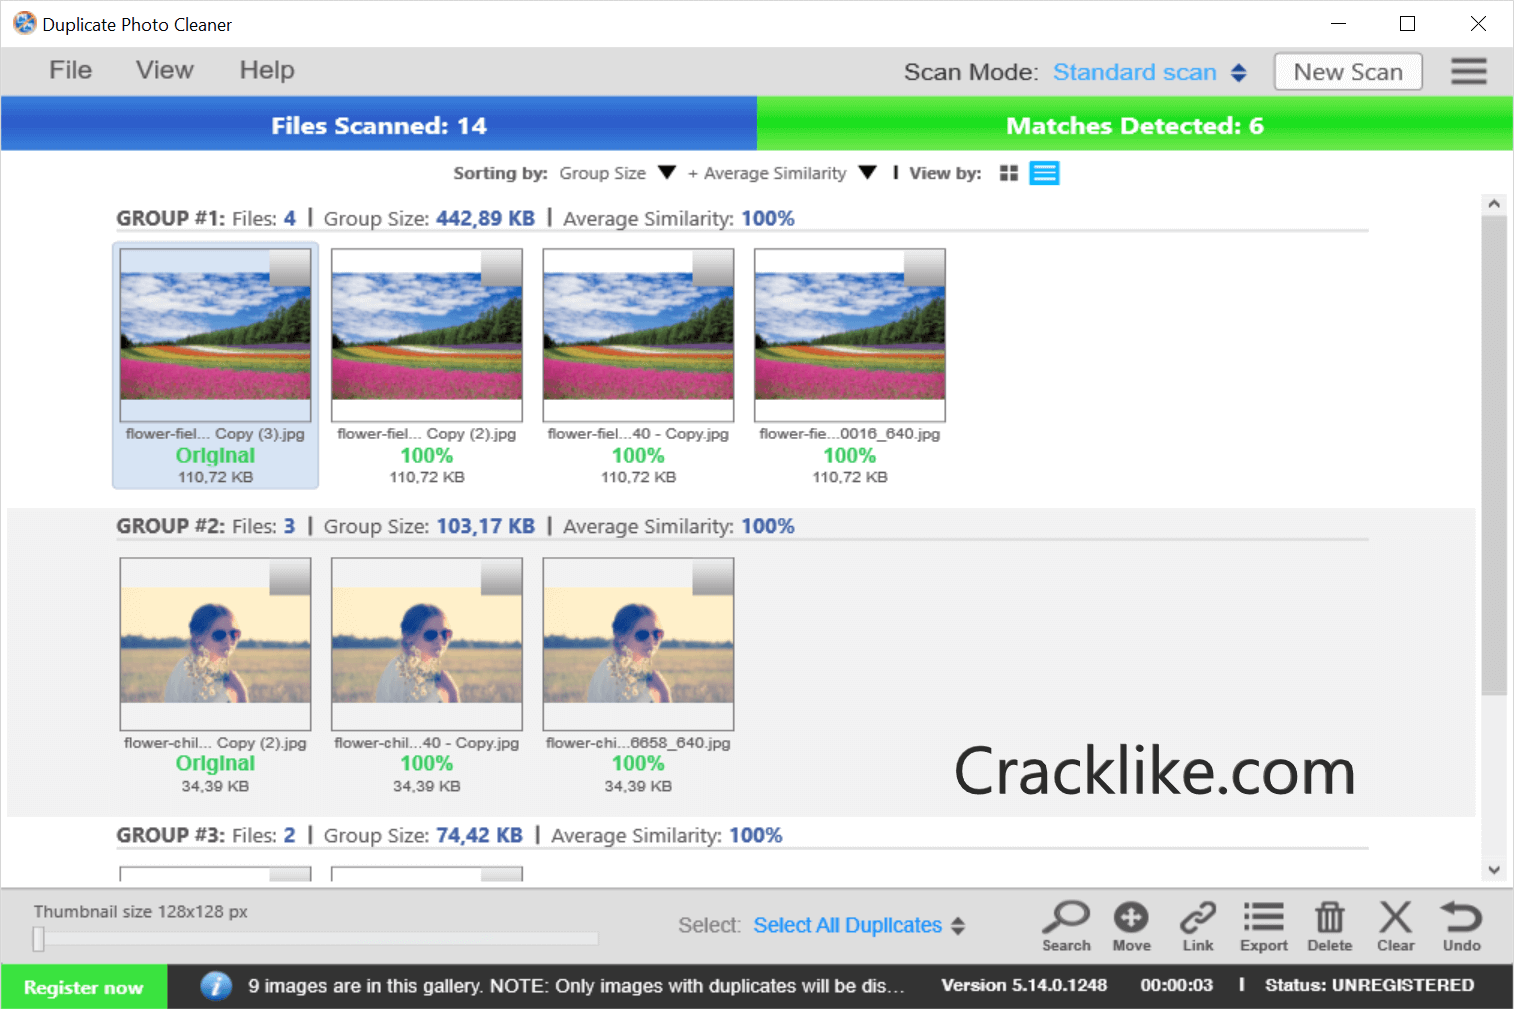 Duplicate Photo Cleaner 7.11.0.25 Crack With License Key Latest Version Free Download 2023